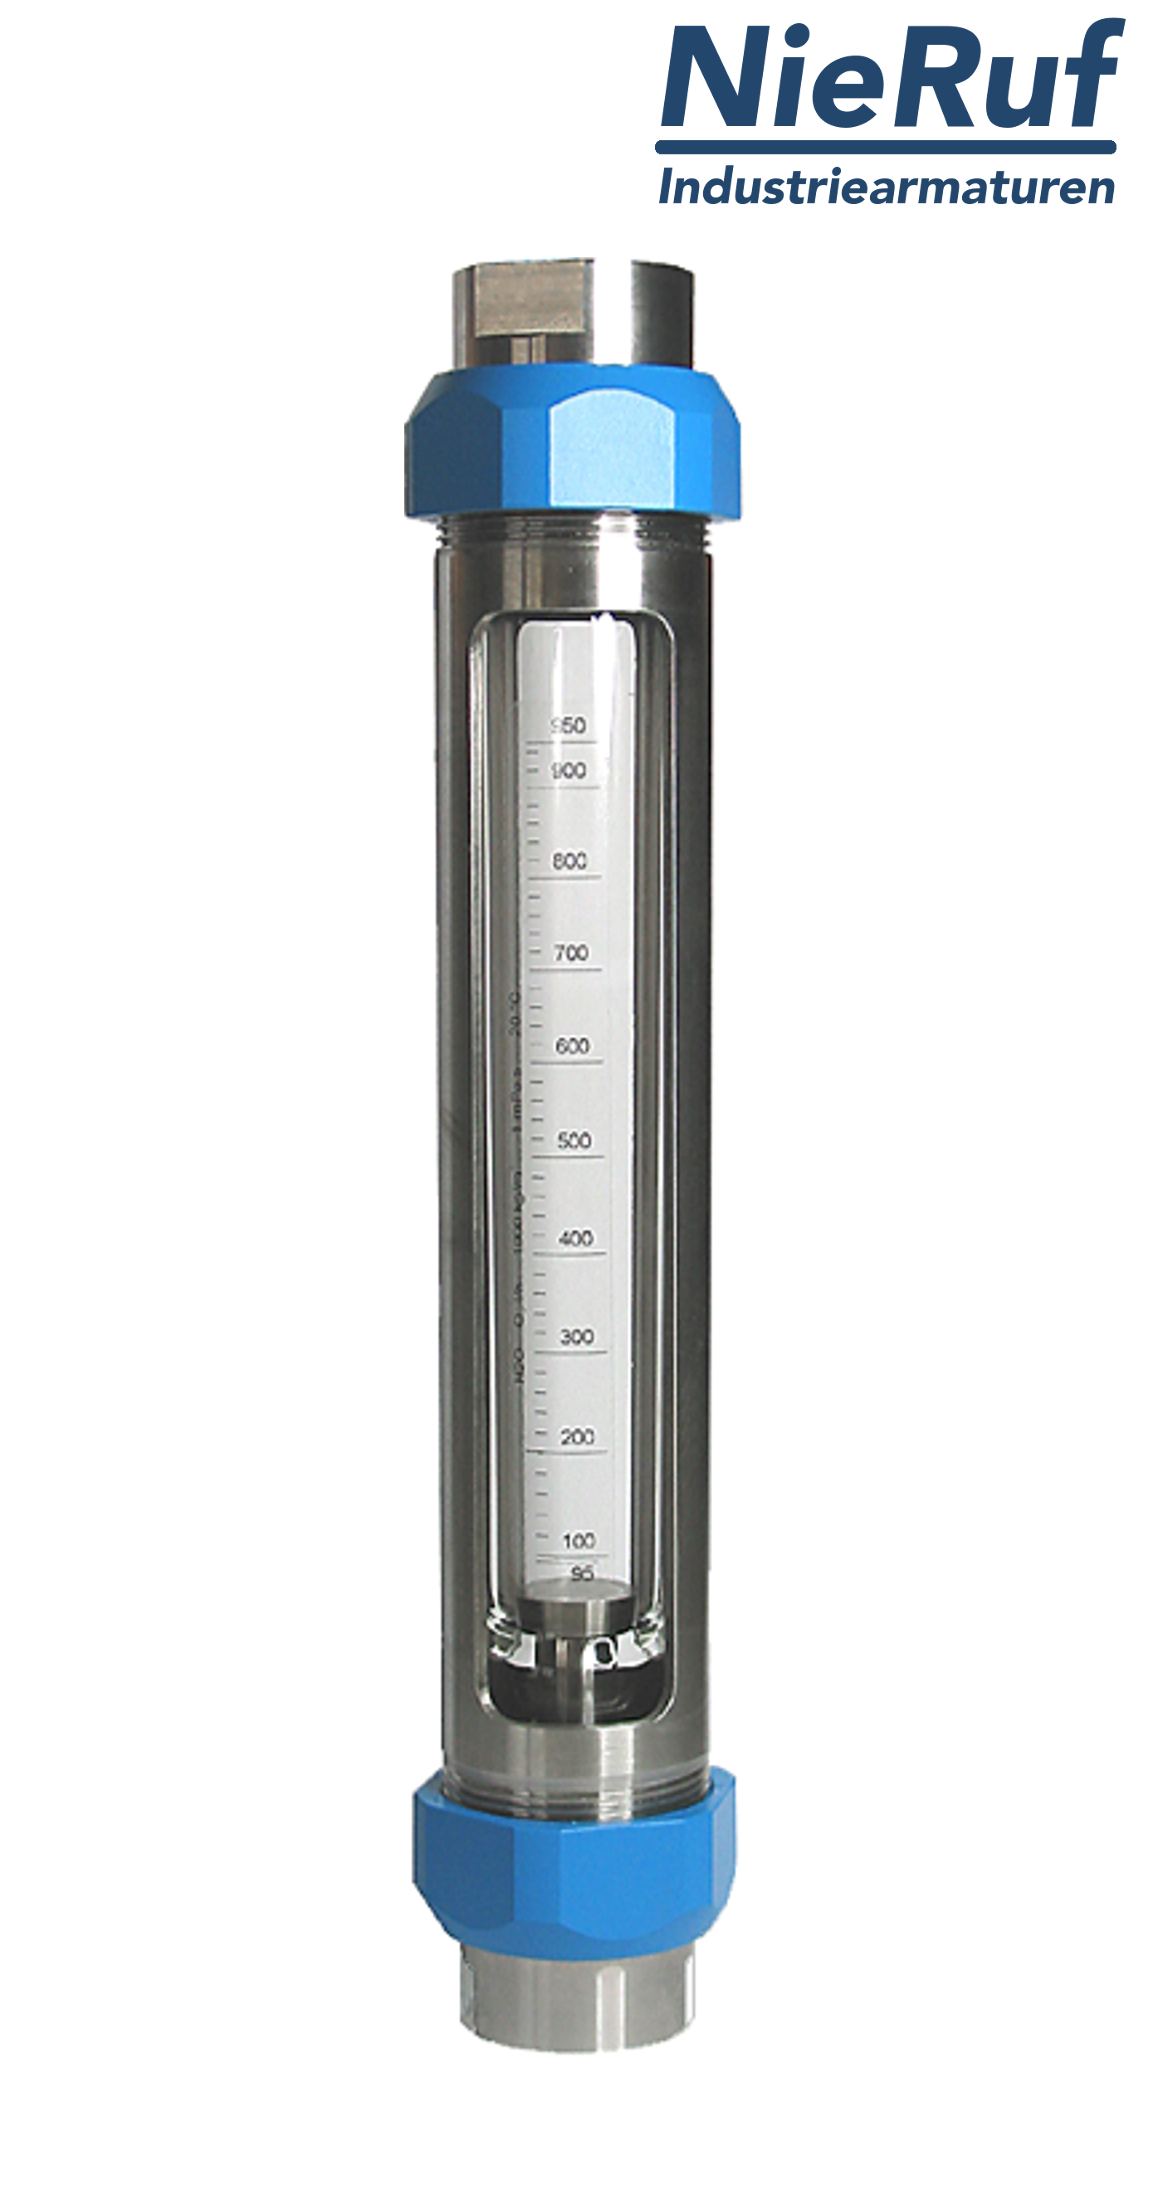 Variable area flowmeter stainless steel + borosilicate 3/4" inch 160.0 - 1600 l/h water FKM